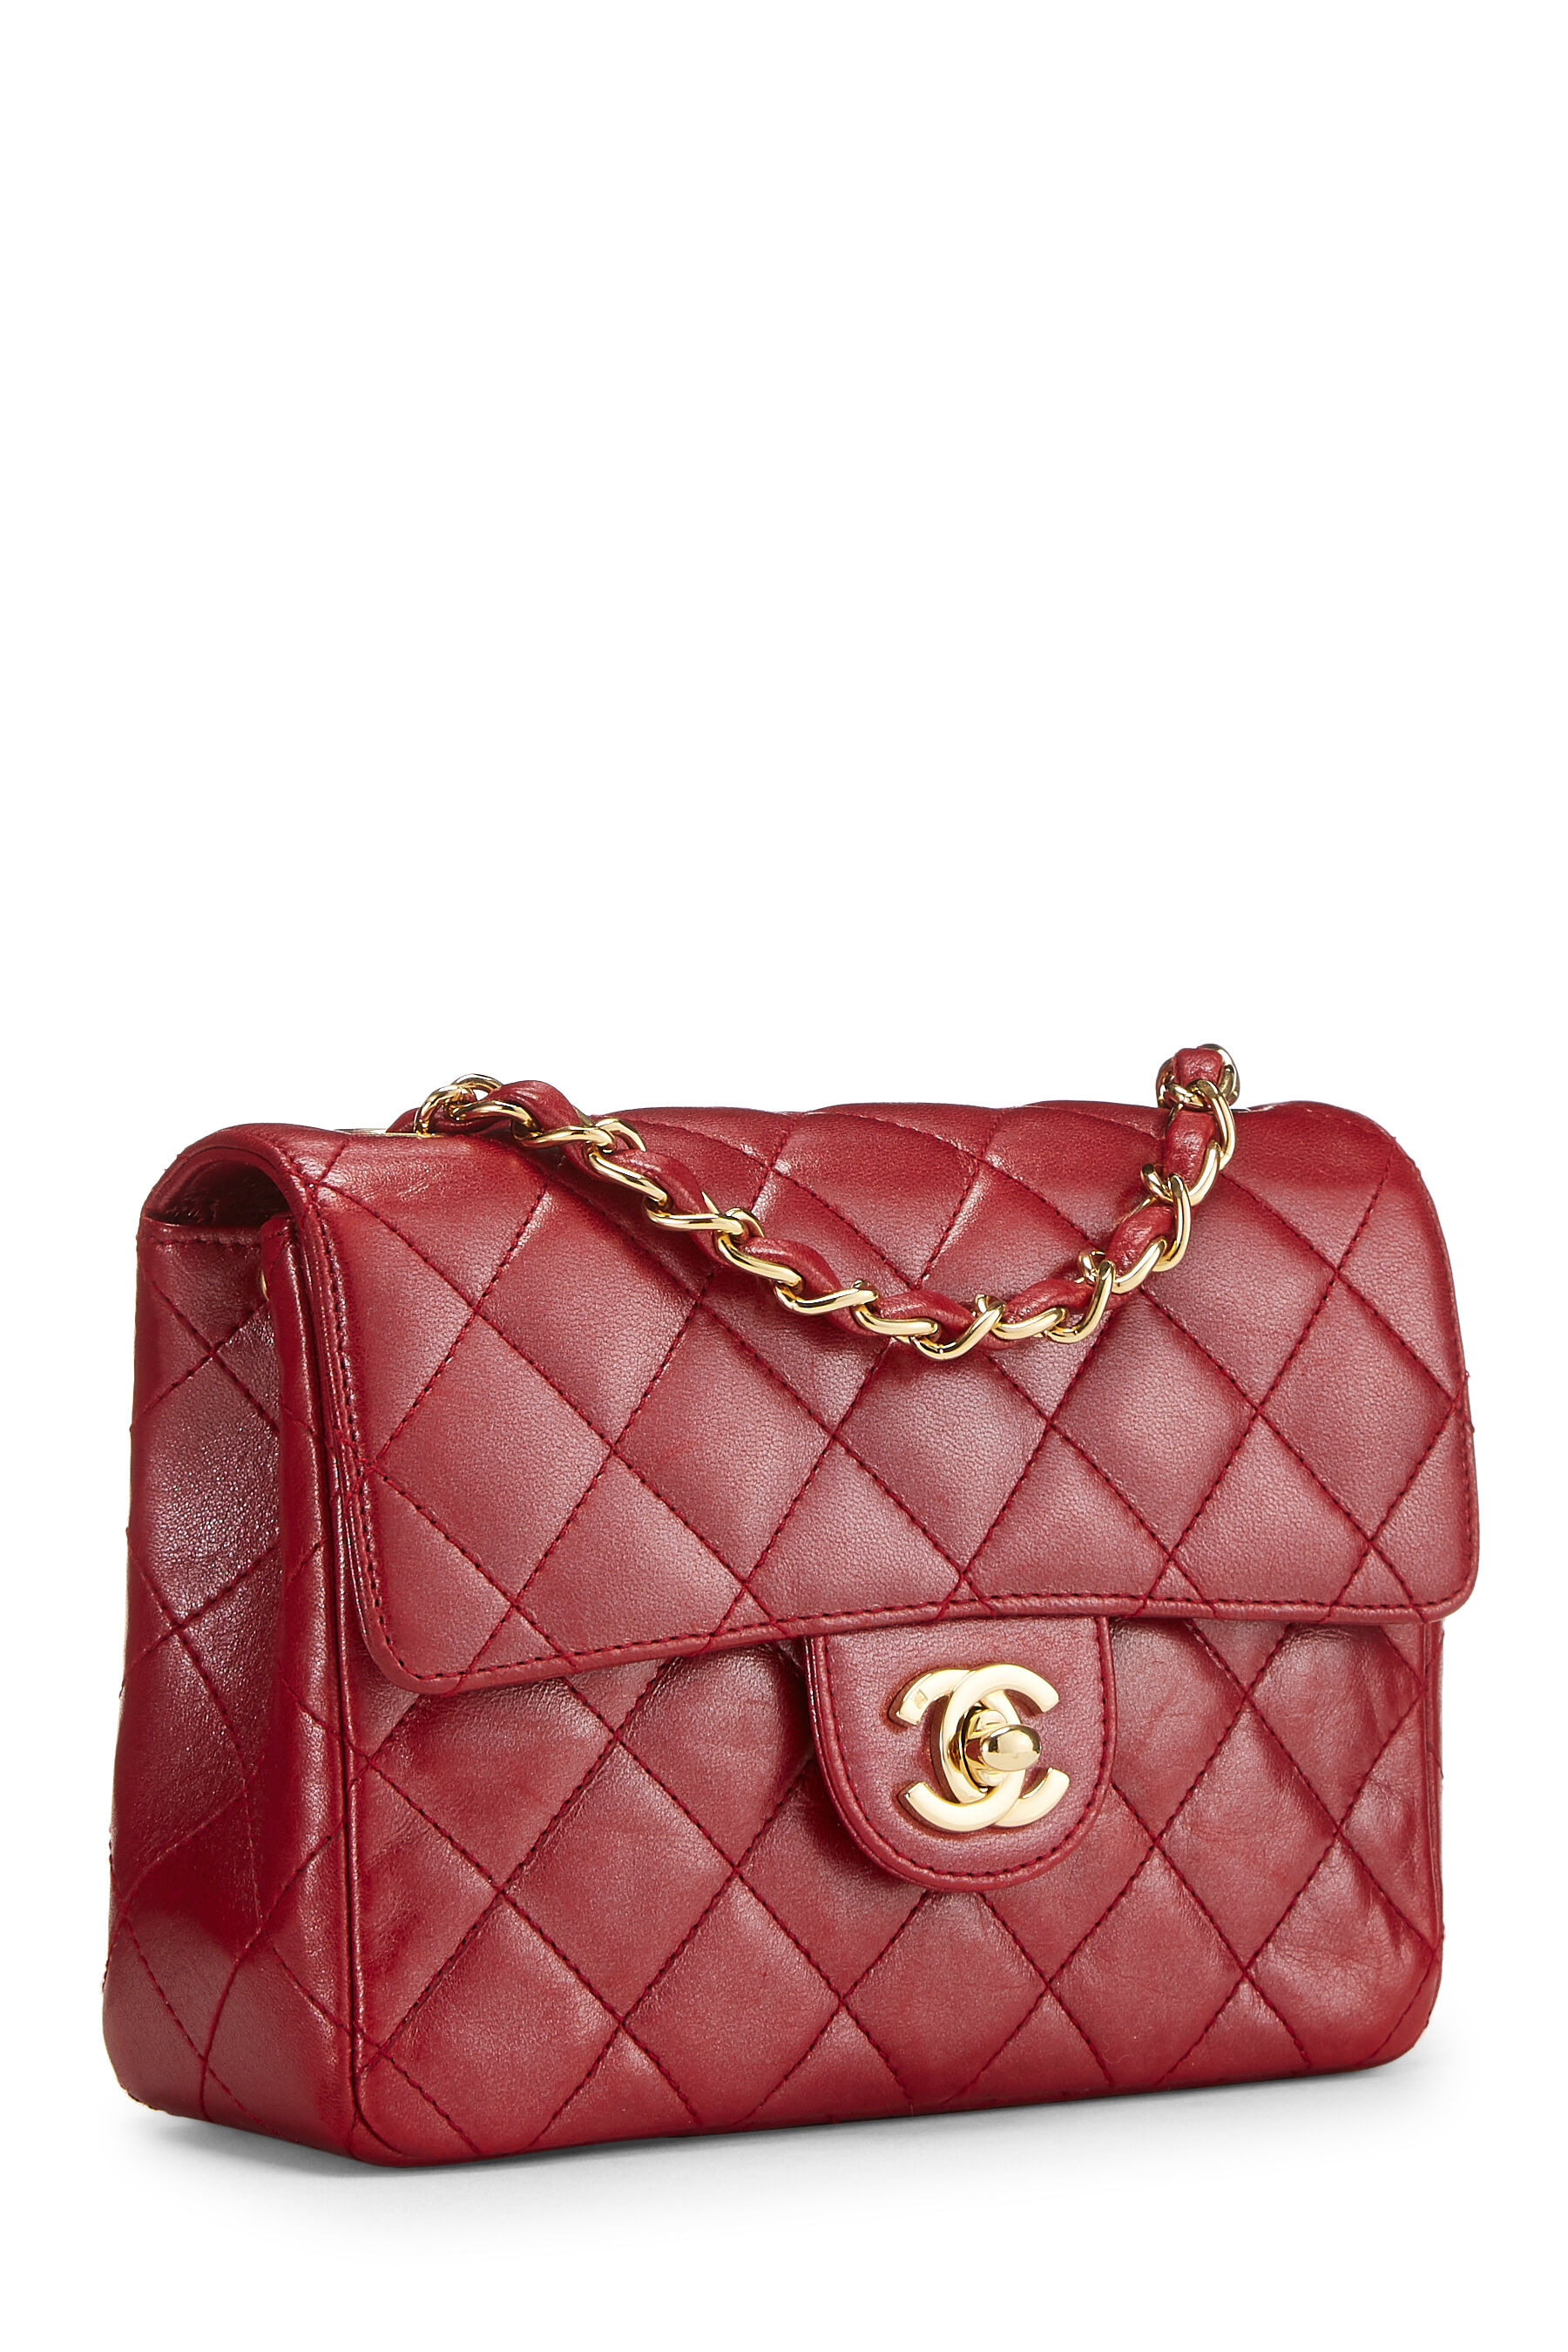 SOOK: Shopping Discovery: Find & Buy Direct: chanel-quilted-red-nano-flap- mini-micro-chain-bag-861232